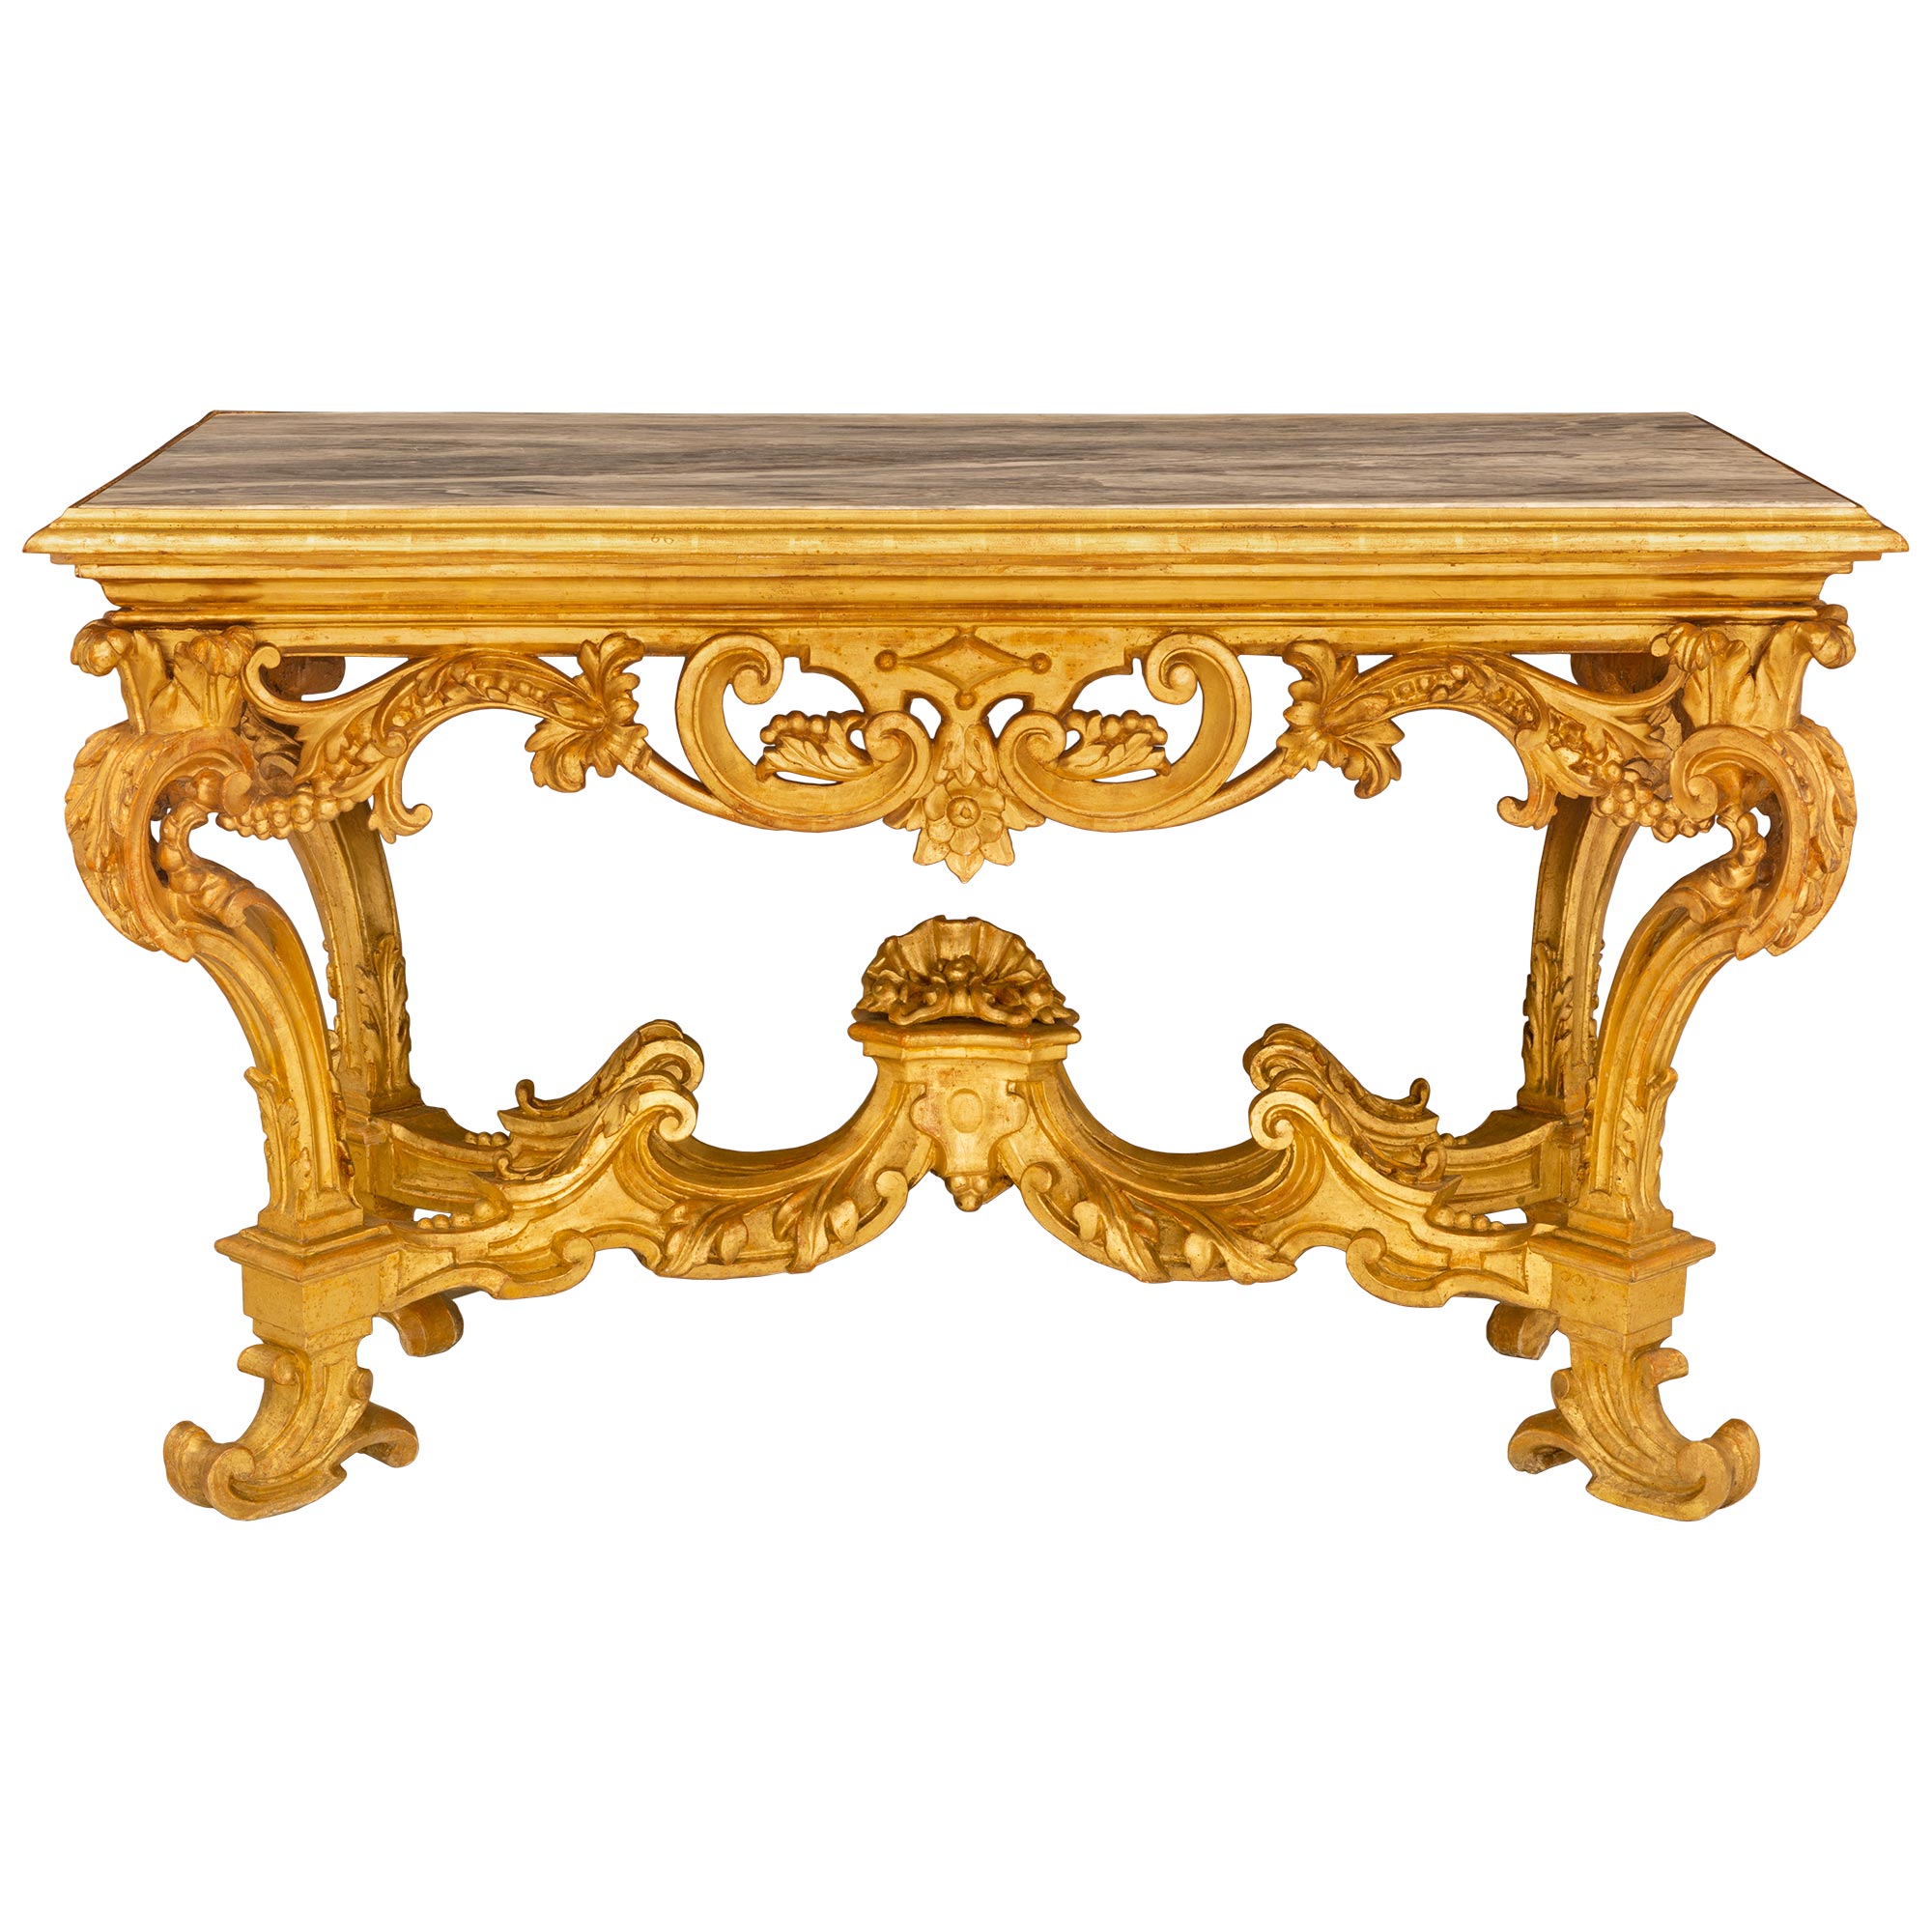 Italian Early 18th Century Louis XIV Period Giltwood and Marble Console